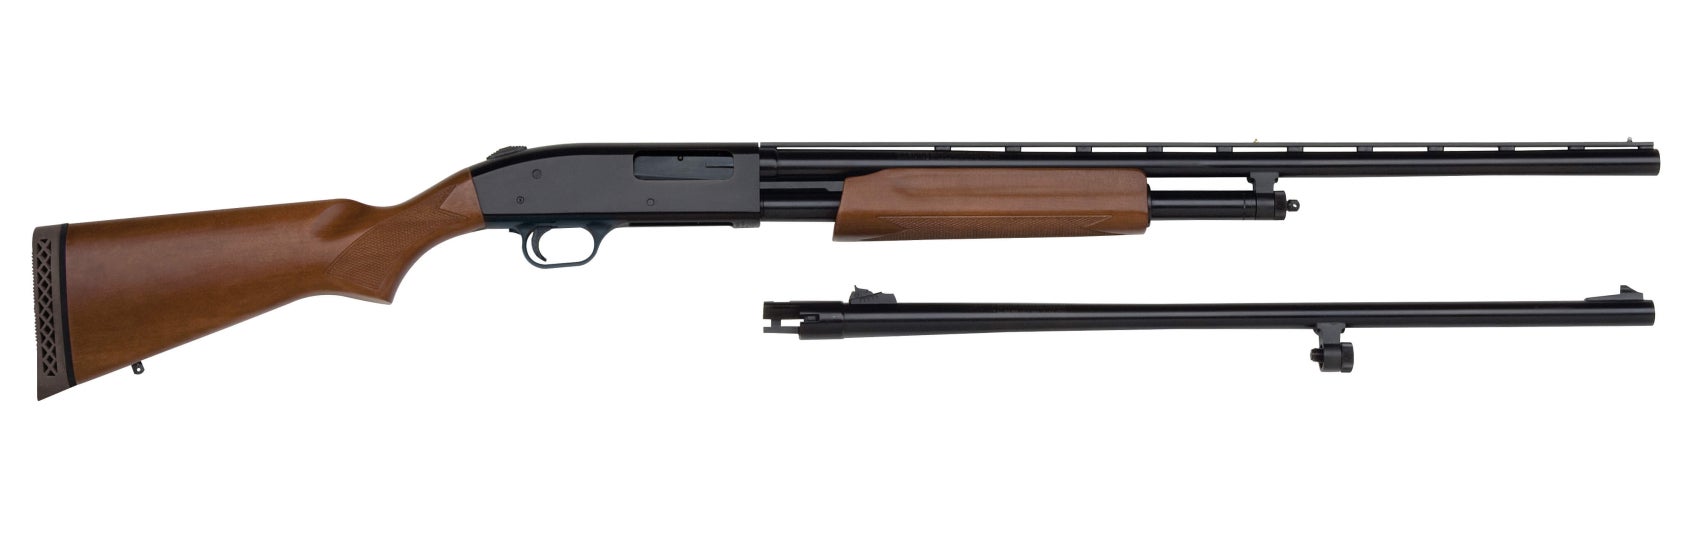 Photo of a Mossberg 500